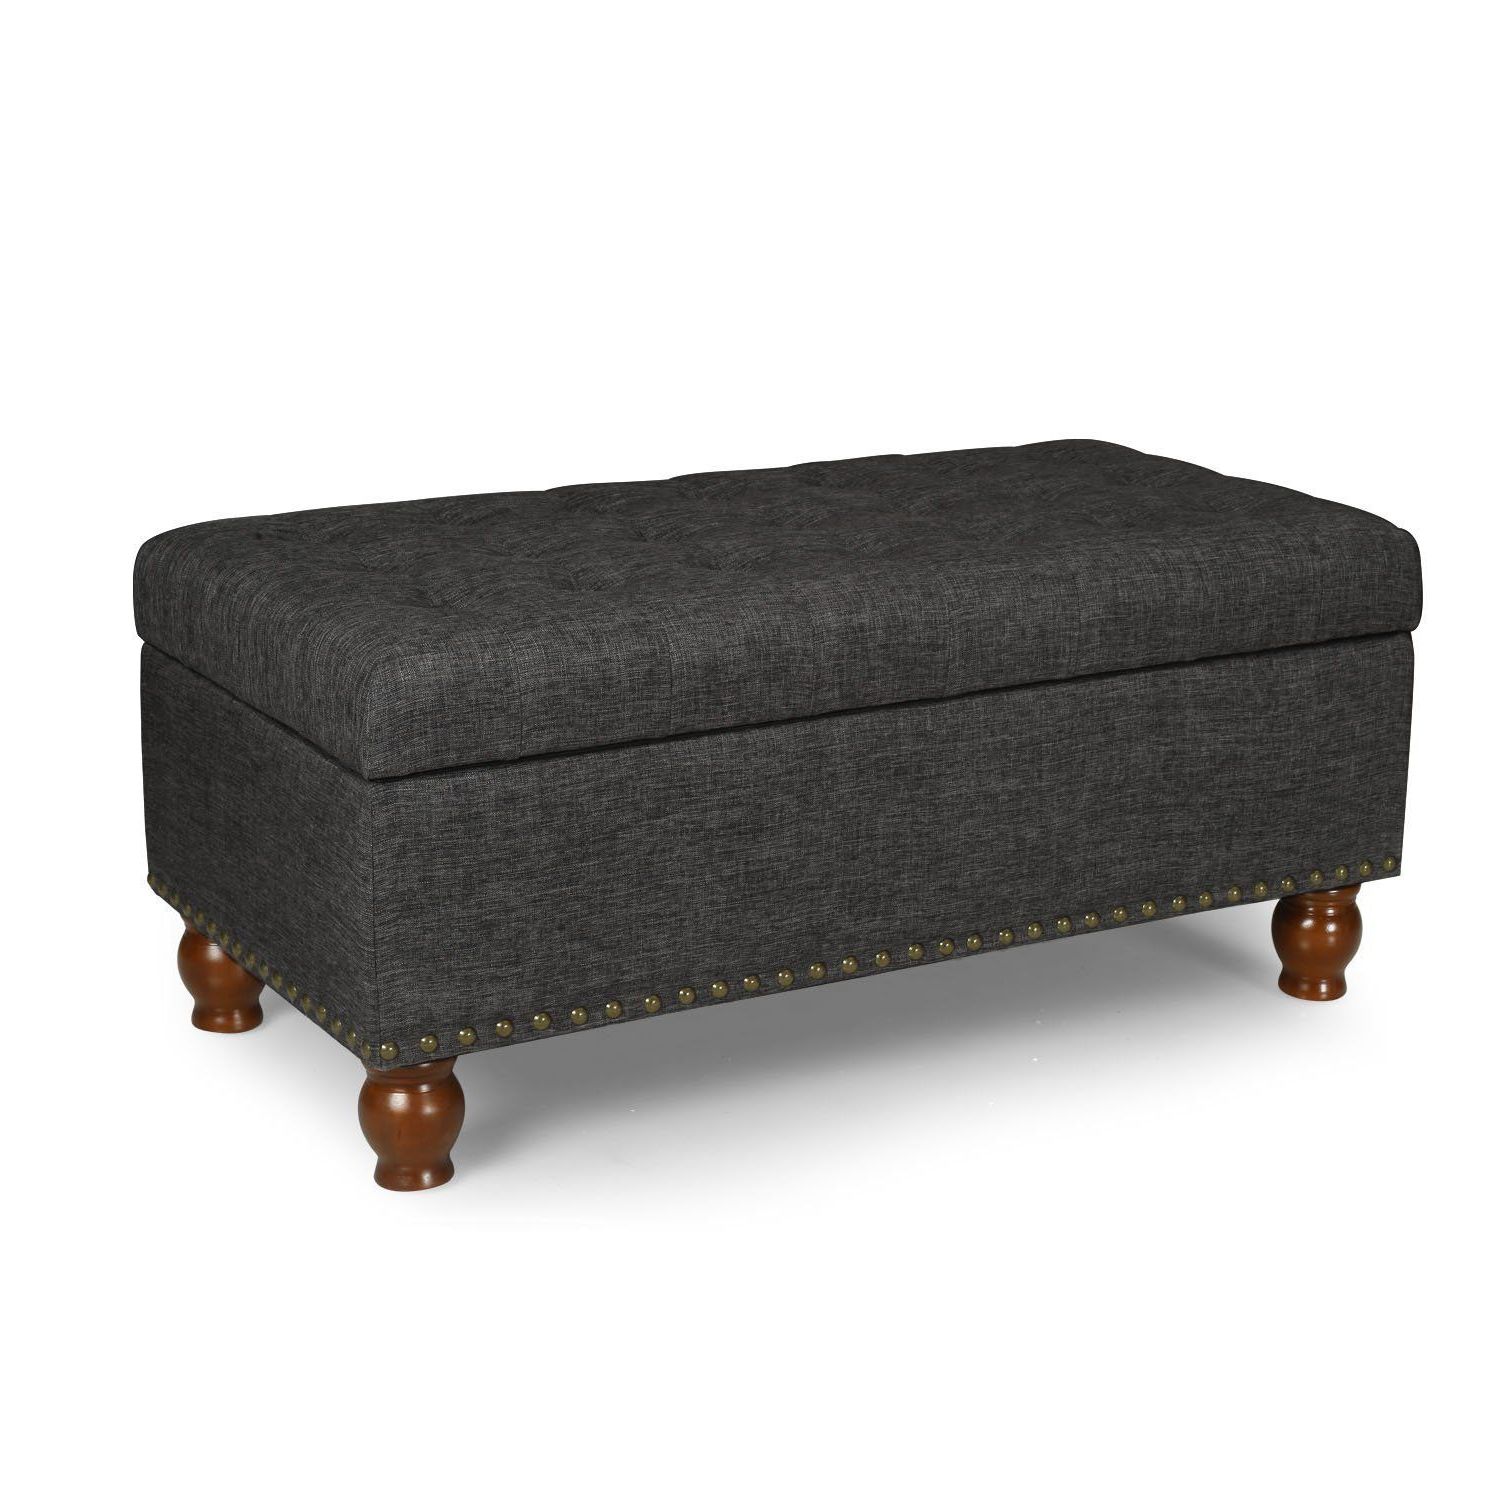 Widely Used Amazon: Adeco Faux Linen Fabric Retangular Tufted Lift Top Storage Intended For Linen Tufted Lift Top Storage Trunk (View 3 of 10)